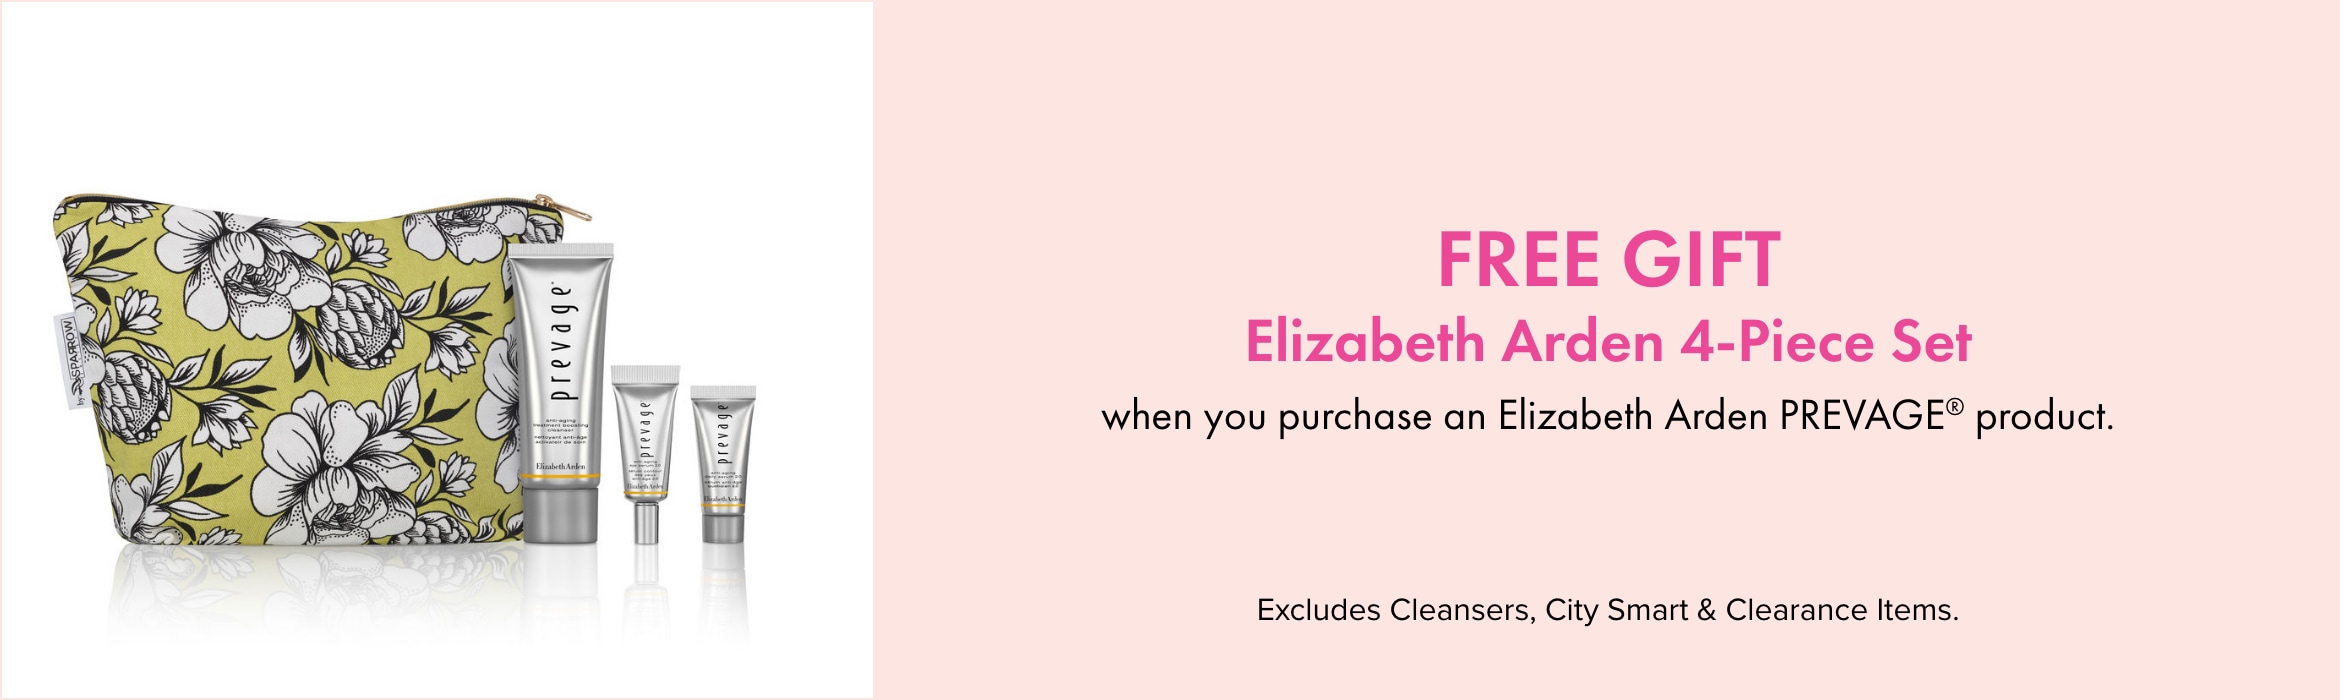 FREE GIFT Elizabeth Arden 4-Piece Set when you purchase a Prevage product by Elizabeth Arden